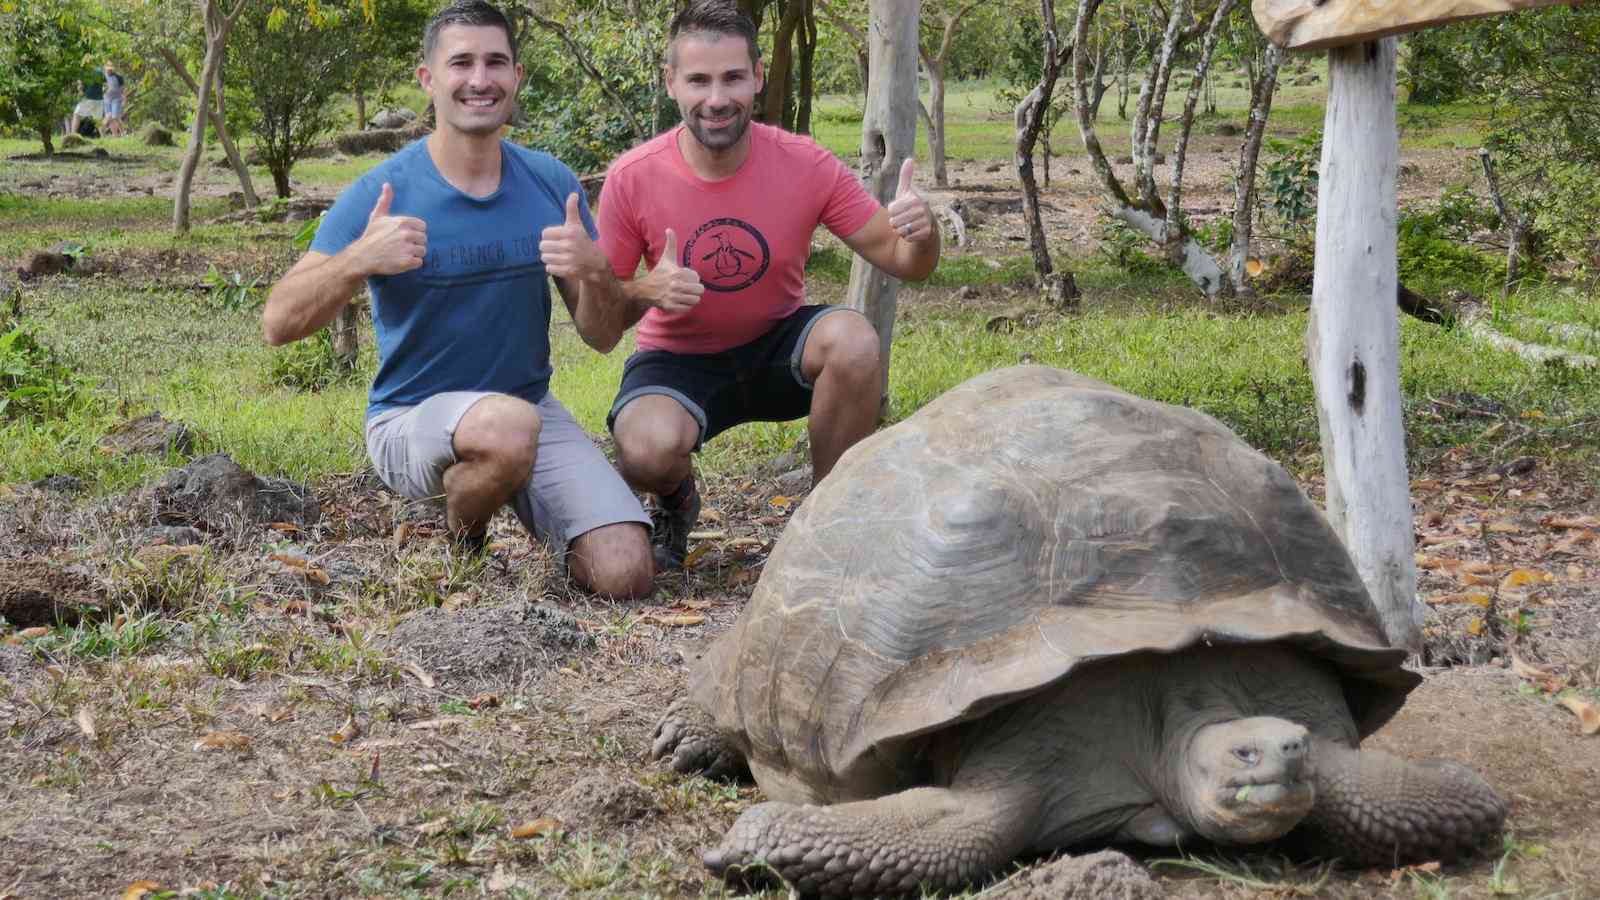 The biggest species of tortoise in the world is the Galapagos Tortoise from the Galapagos Islands